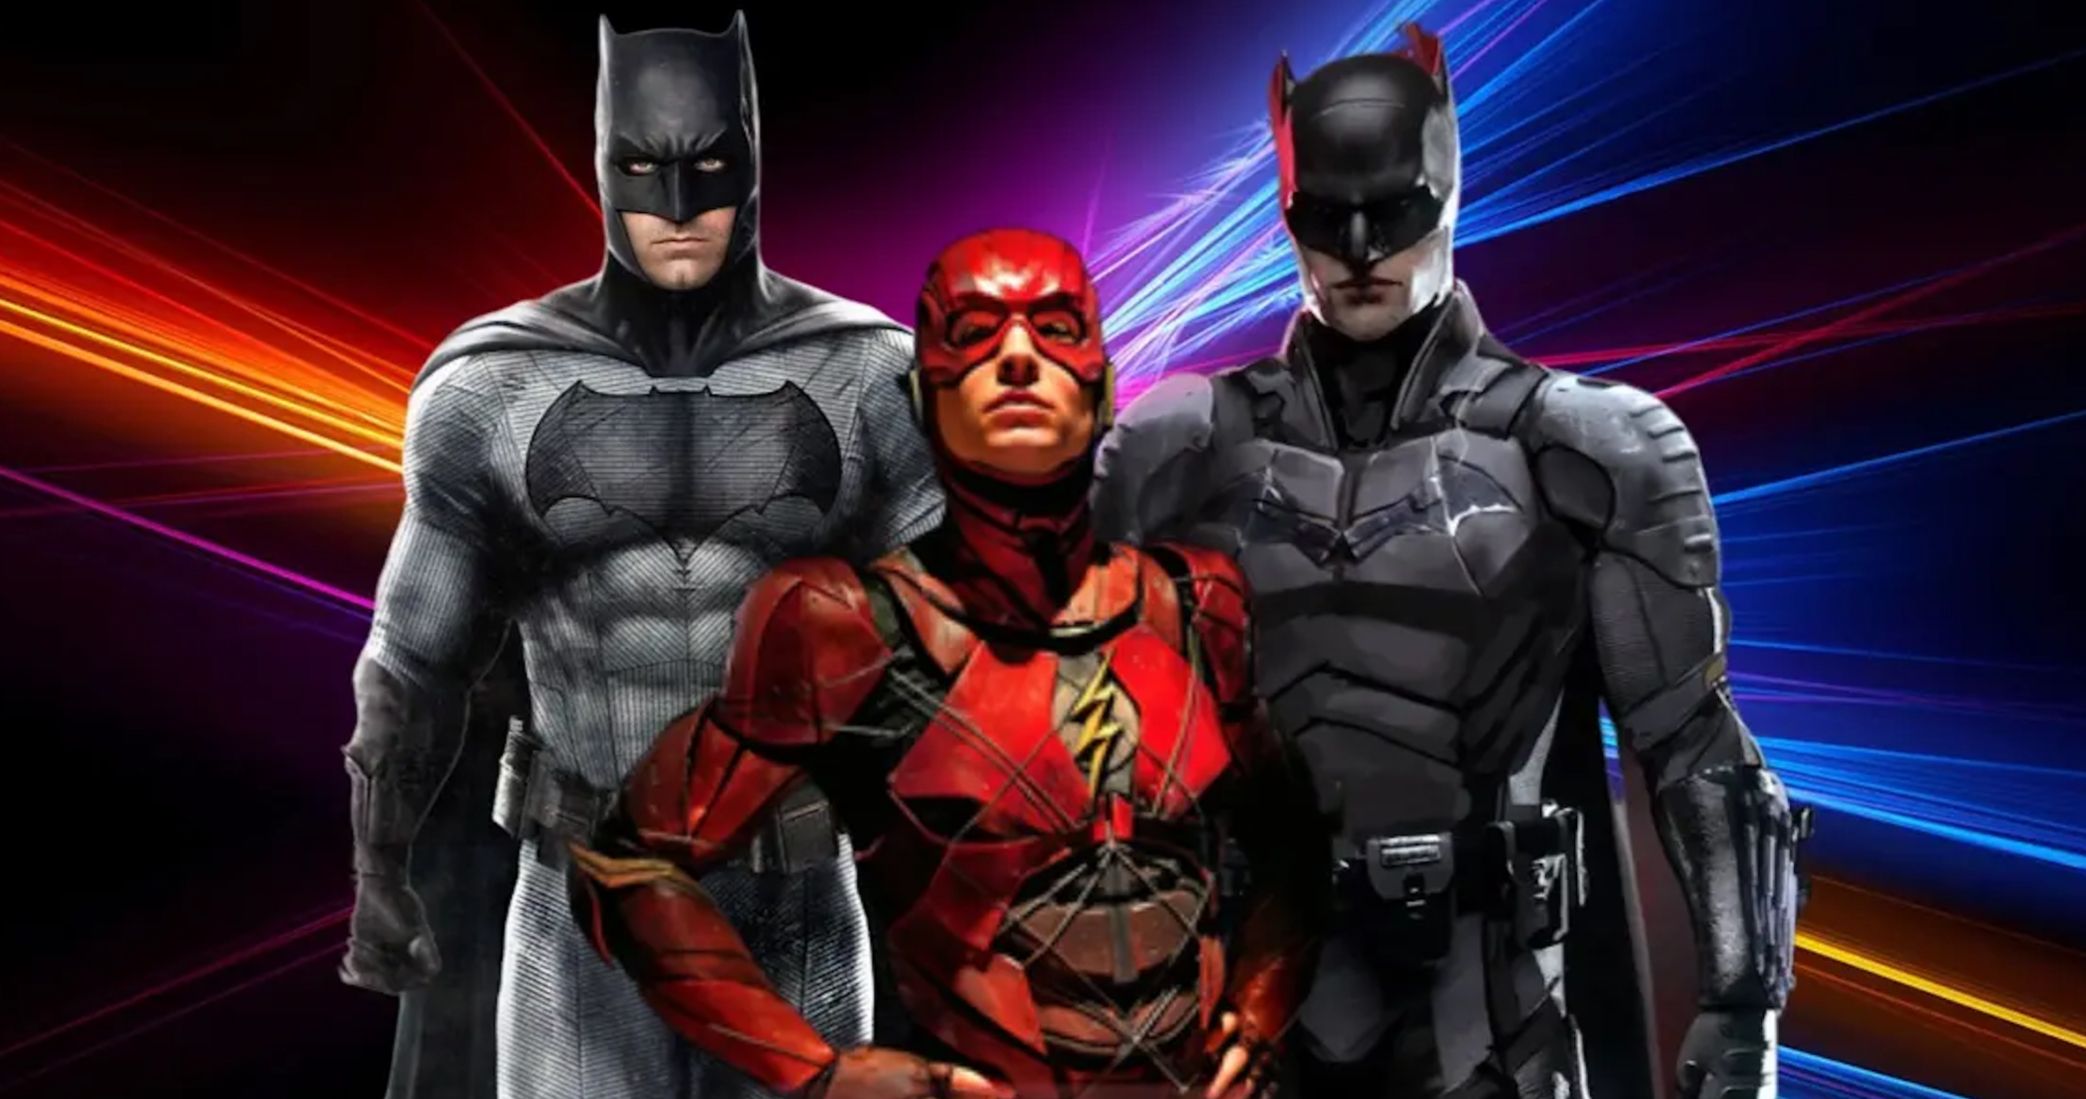 The Flash Movie Sets Up a New Status Quo in the DCEU and Justice League